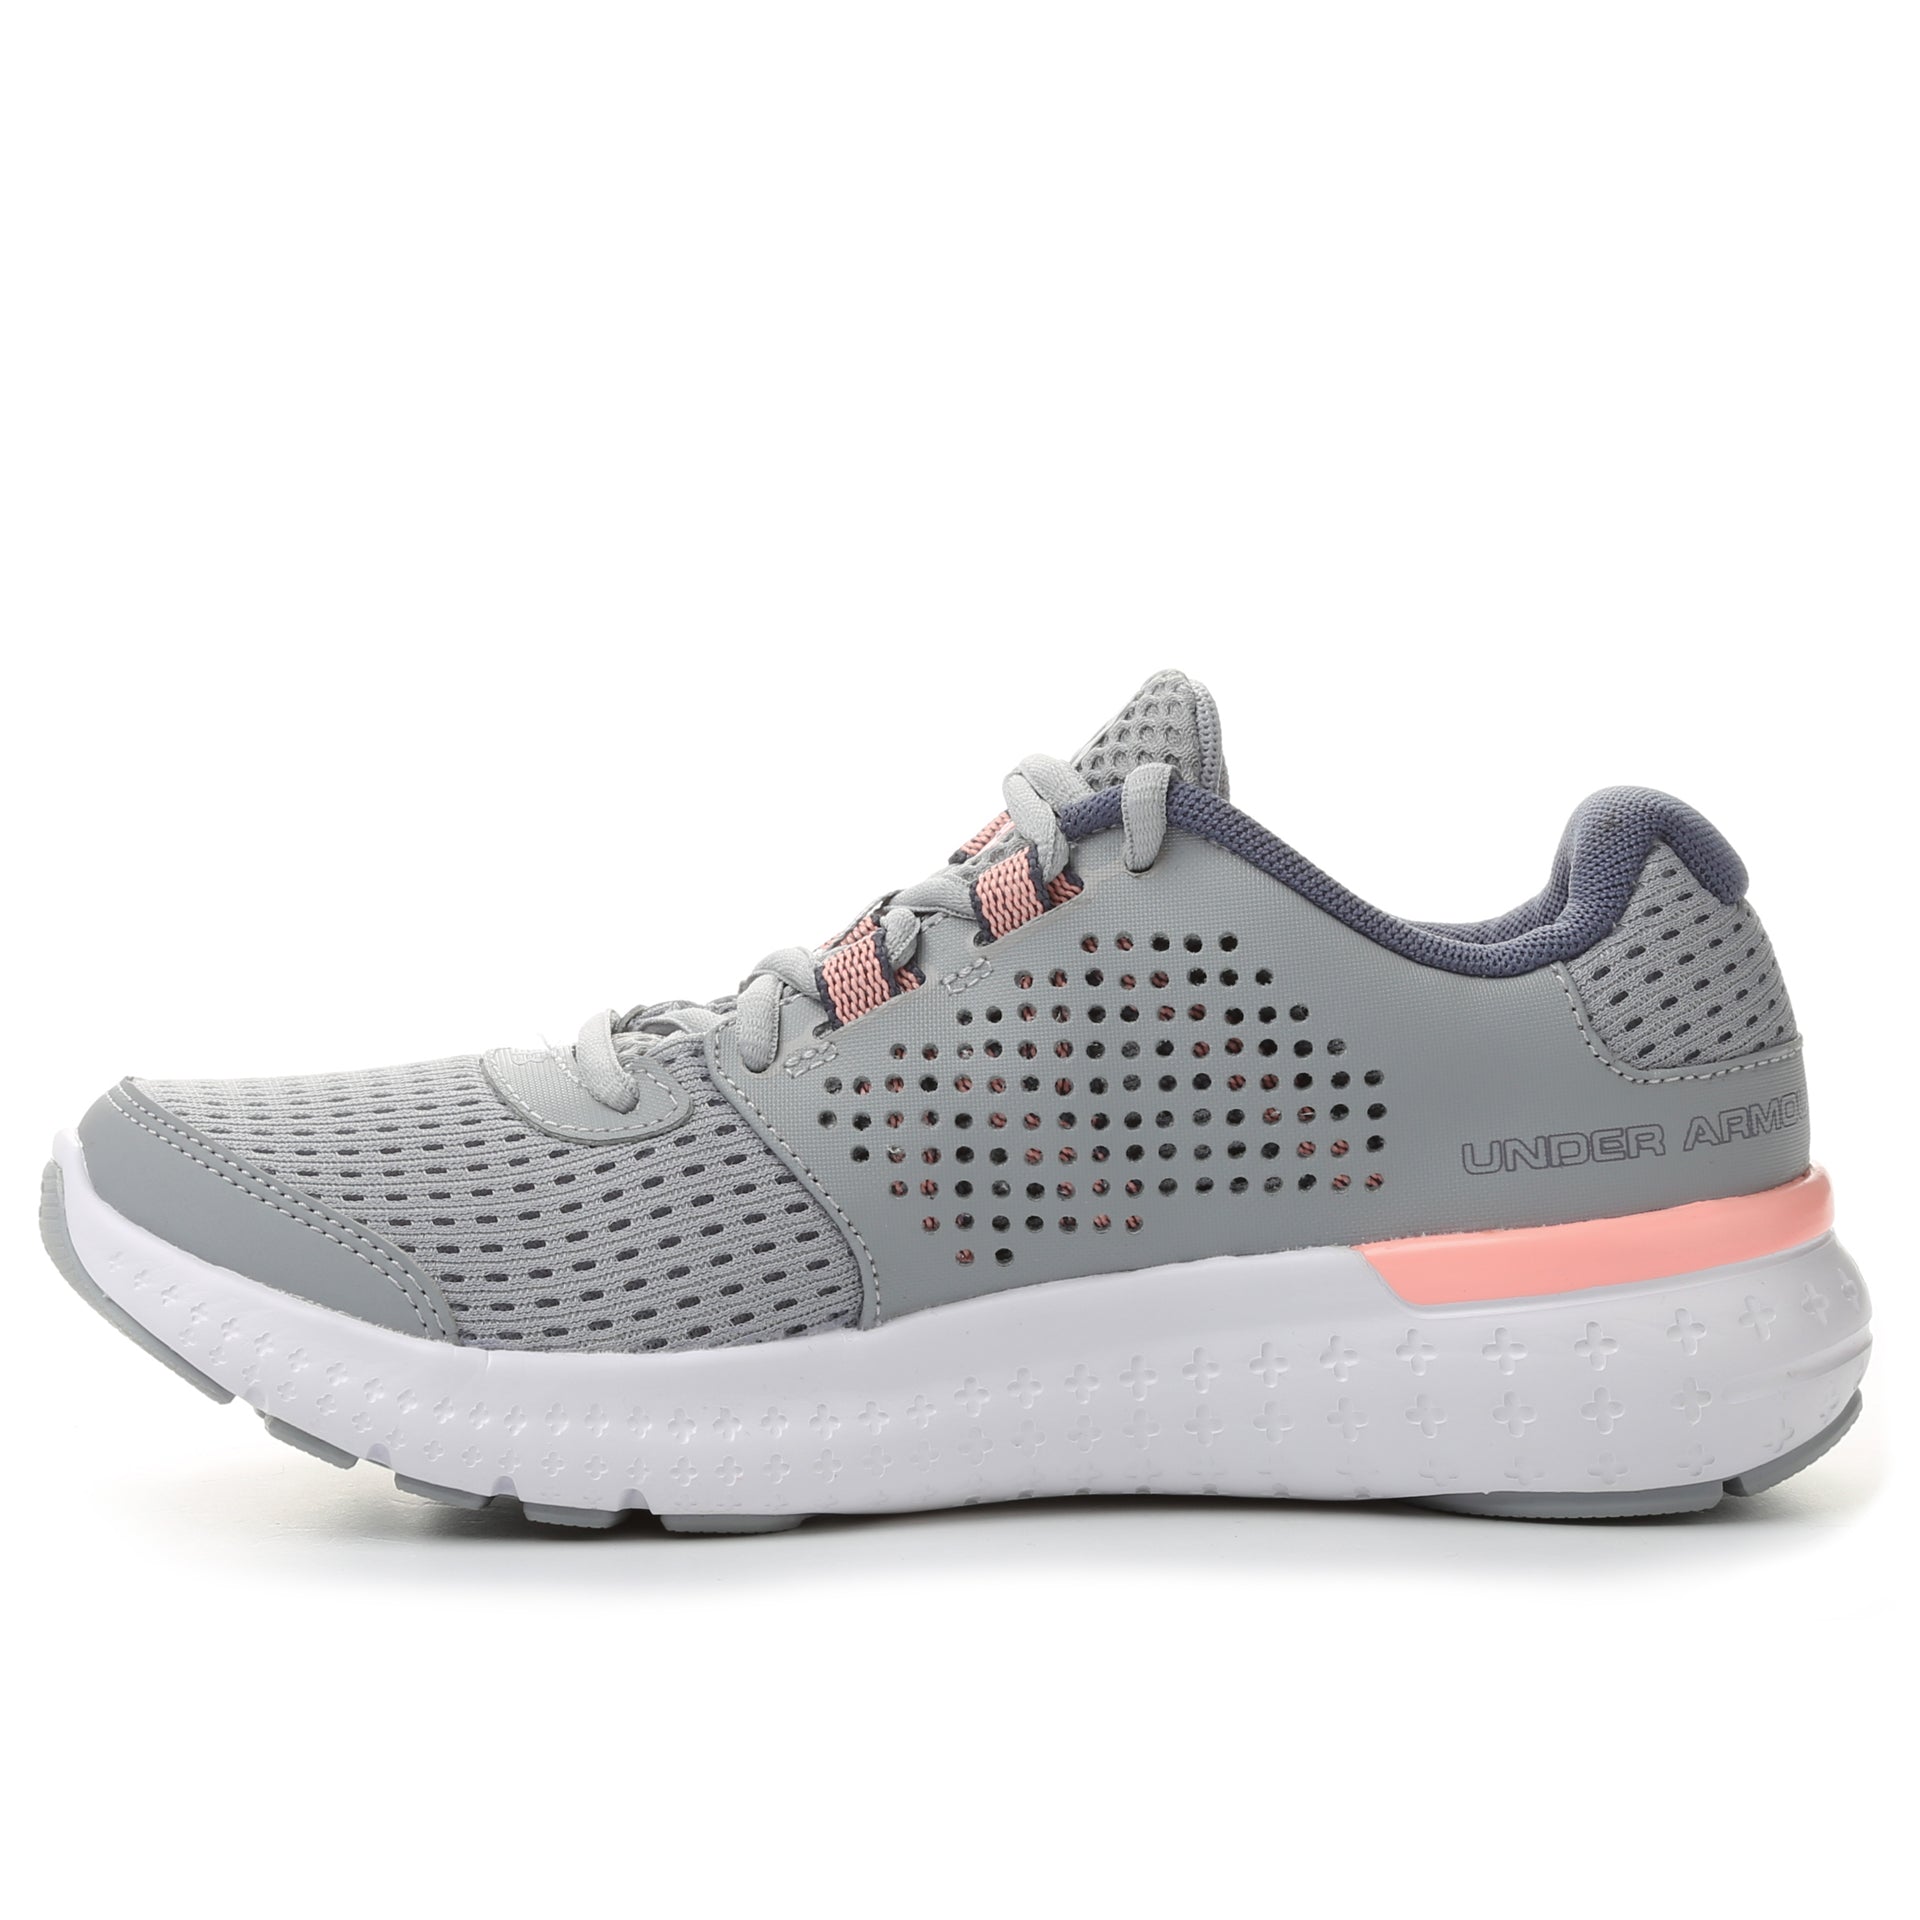 Under Armour Women's Micro Fuel Shoes- Overcast Sa - New Star